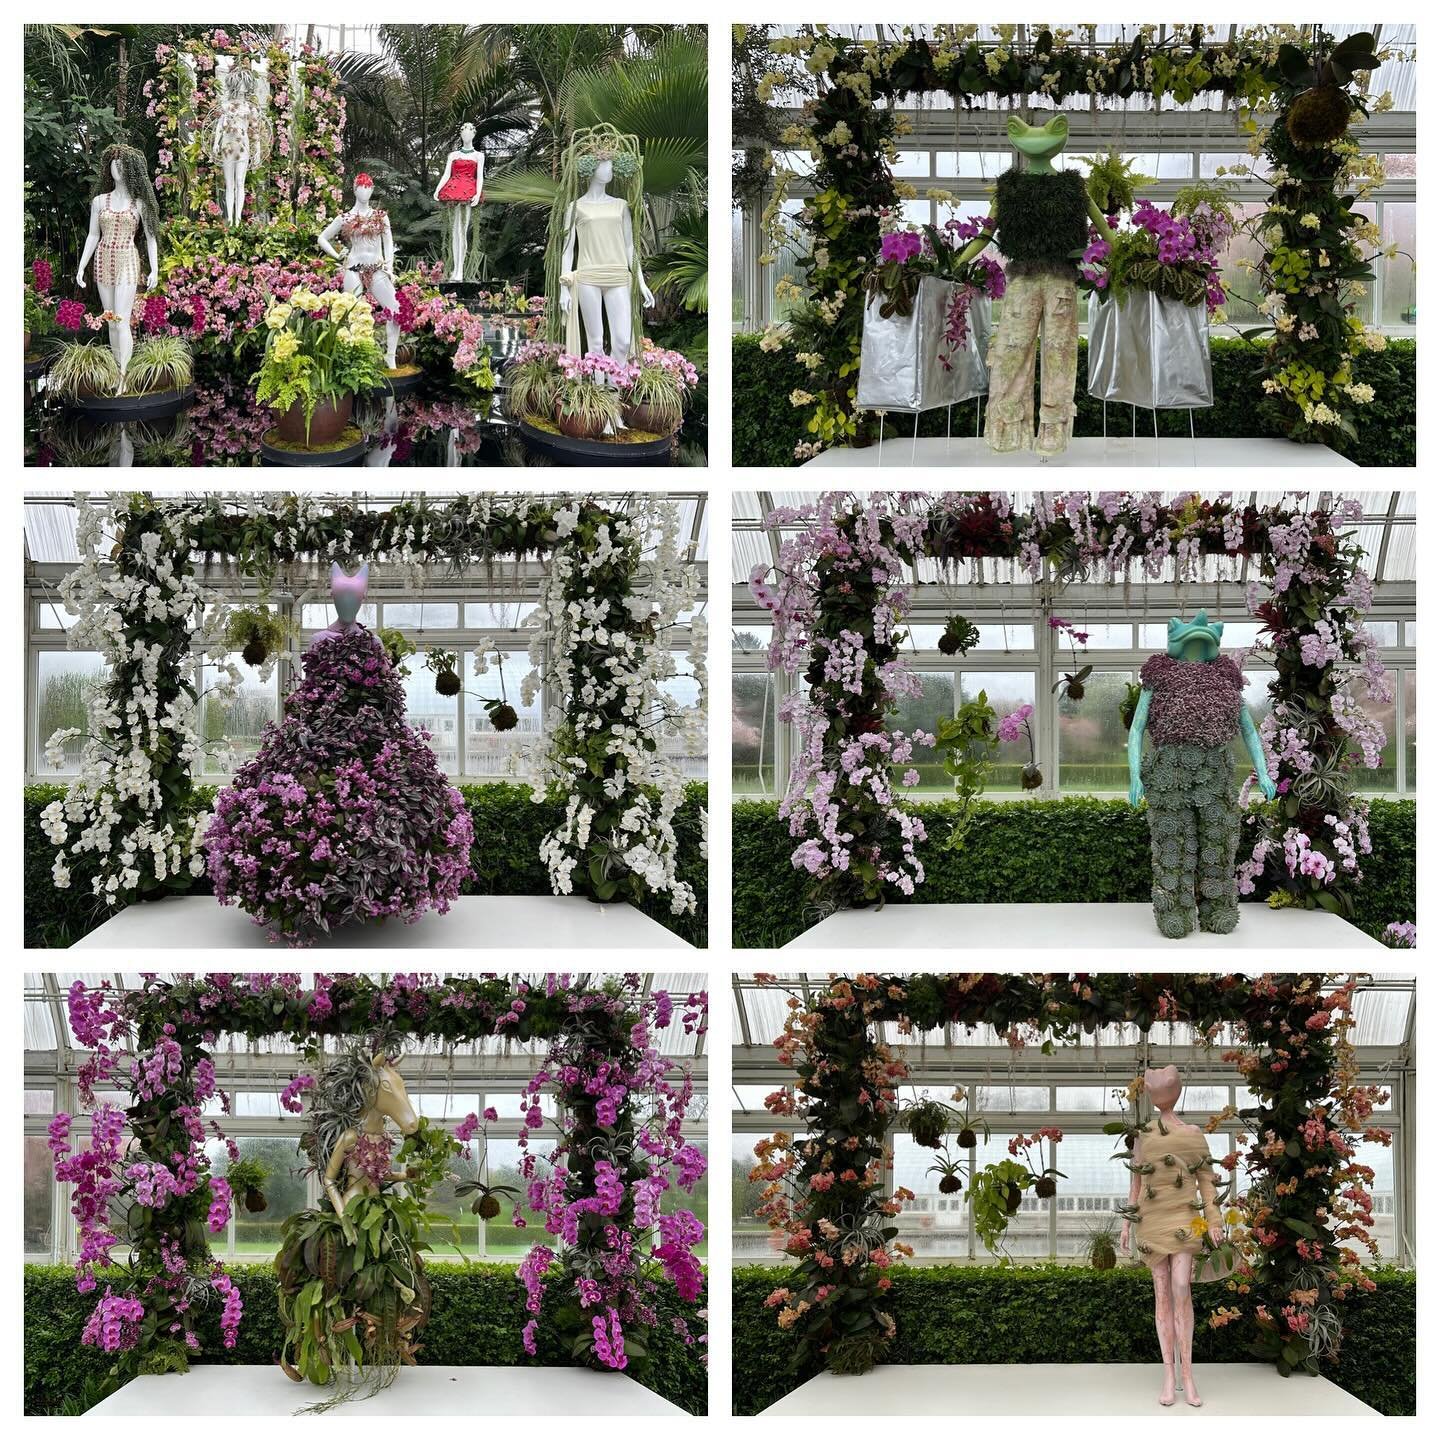 Some highlights from this year&rsquo;s Orchid Show at the NYBG. The theme was Florals in Fashion.